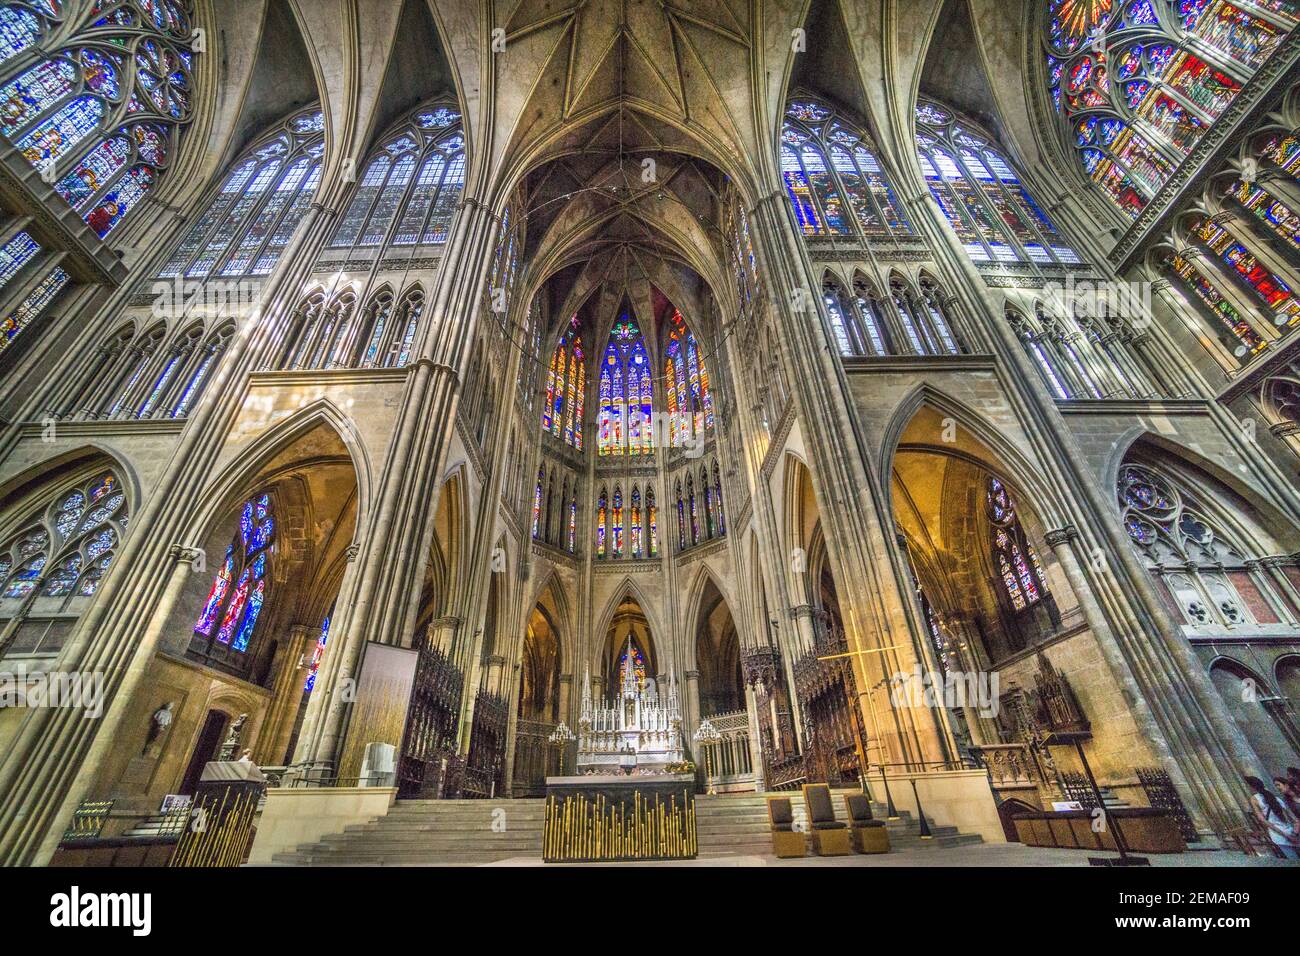 interior of Metz cathedral, looking across the transept to the choir with stained glass windows from the 13th century to the 20th century, Lorraine, M Stock Photo